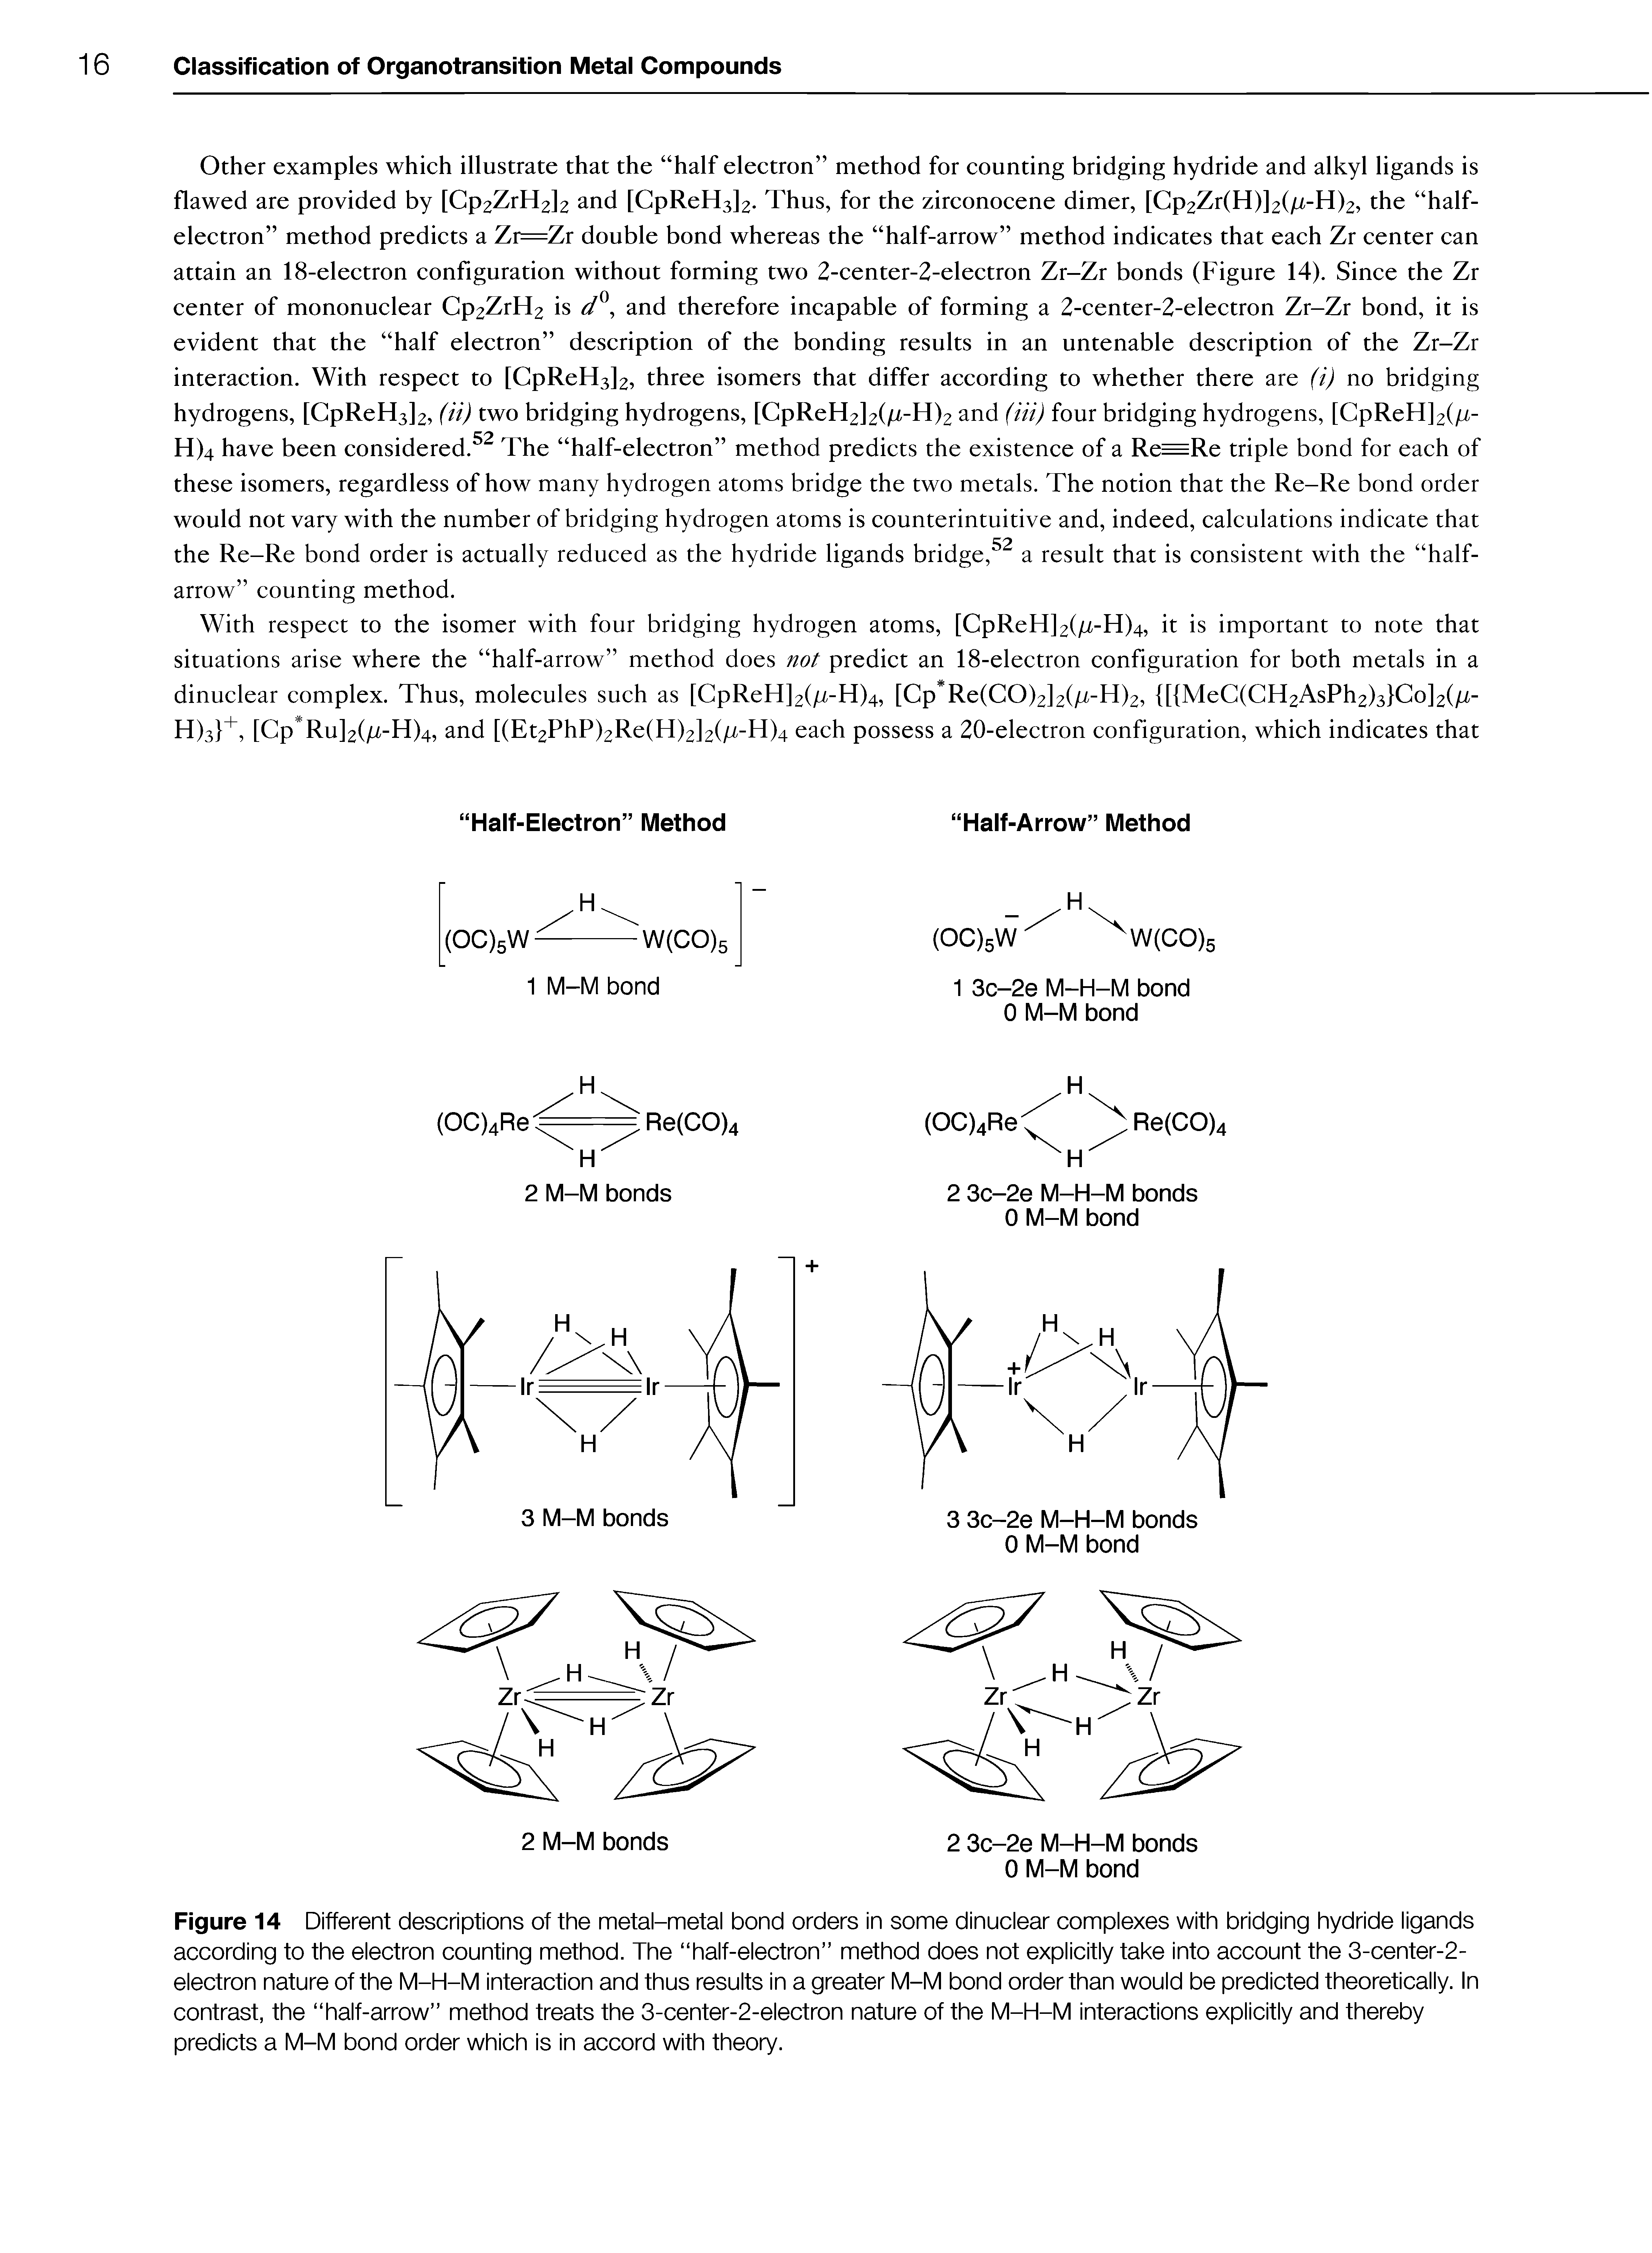 Figure 14 Different descriptions of the metal-metal bond orders in some dinuclear mmnlexes with bridging hydride ligands according to the eiectron counting method. The half-electron method does not o r ti take into account the 3-center-2-electron nature of the M-H-m interaction and thus resuits in a greater M-M predicted theoretically. In...